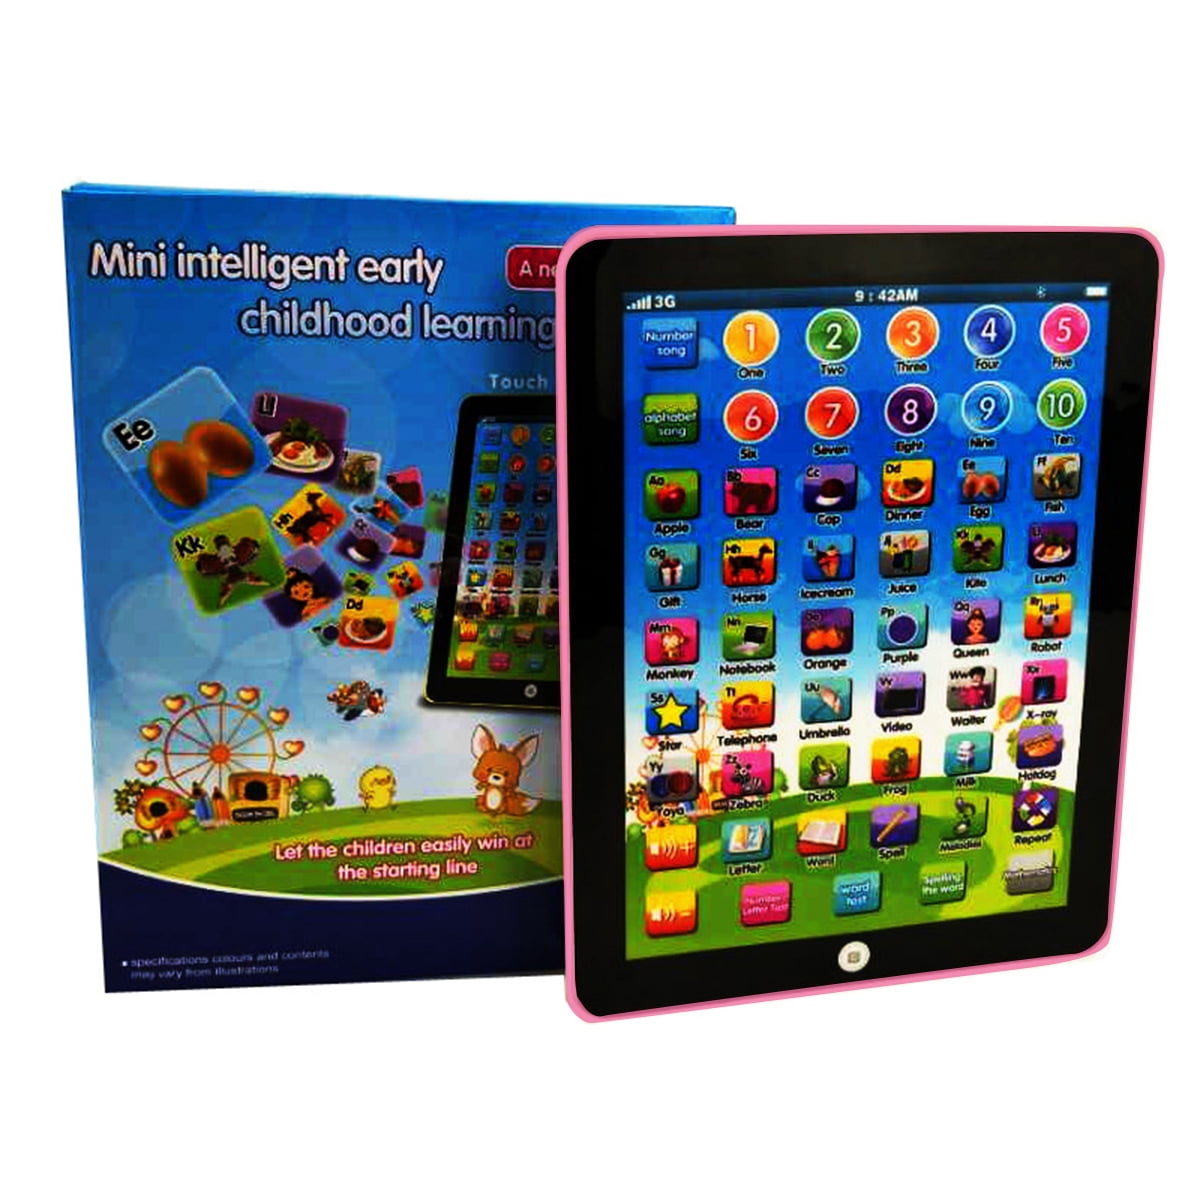 Children's Learning Tablet PROPER ENGLISH PRONUNCIATION Learning Toy USA SELLER 